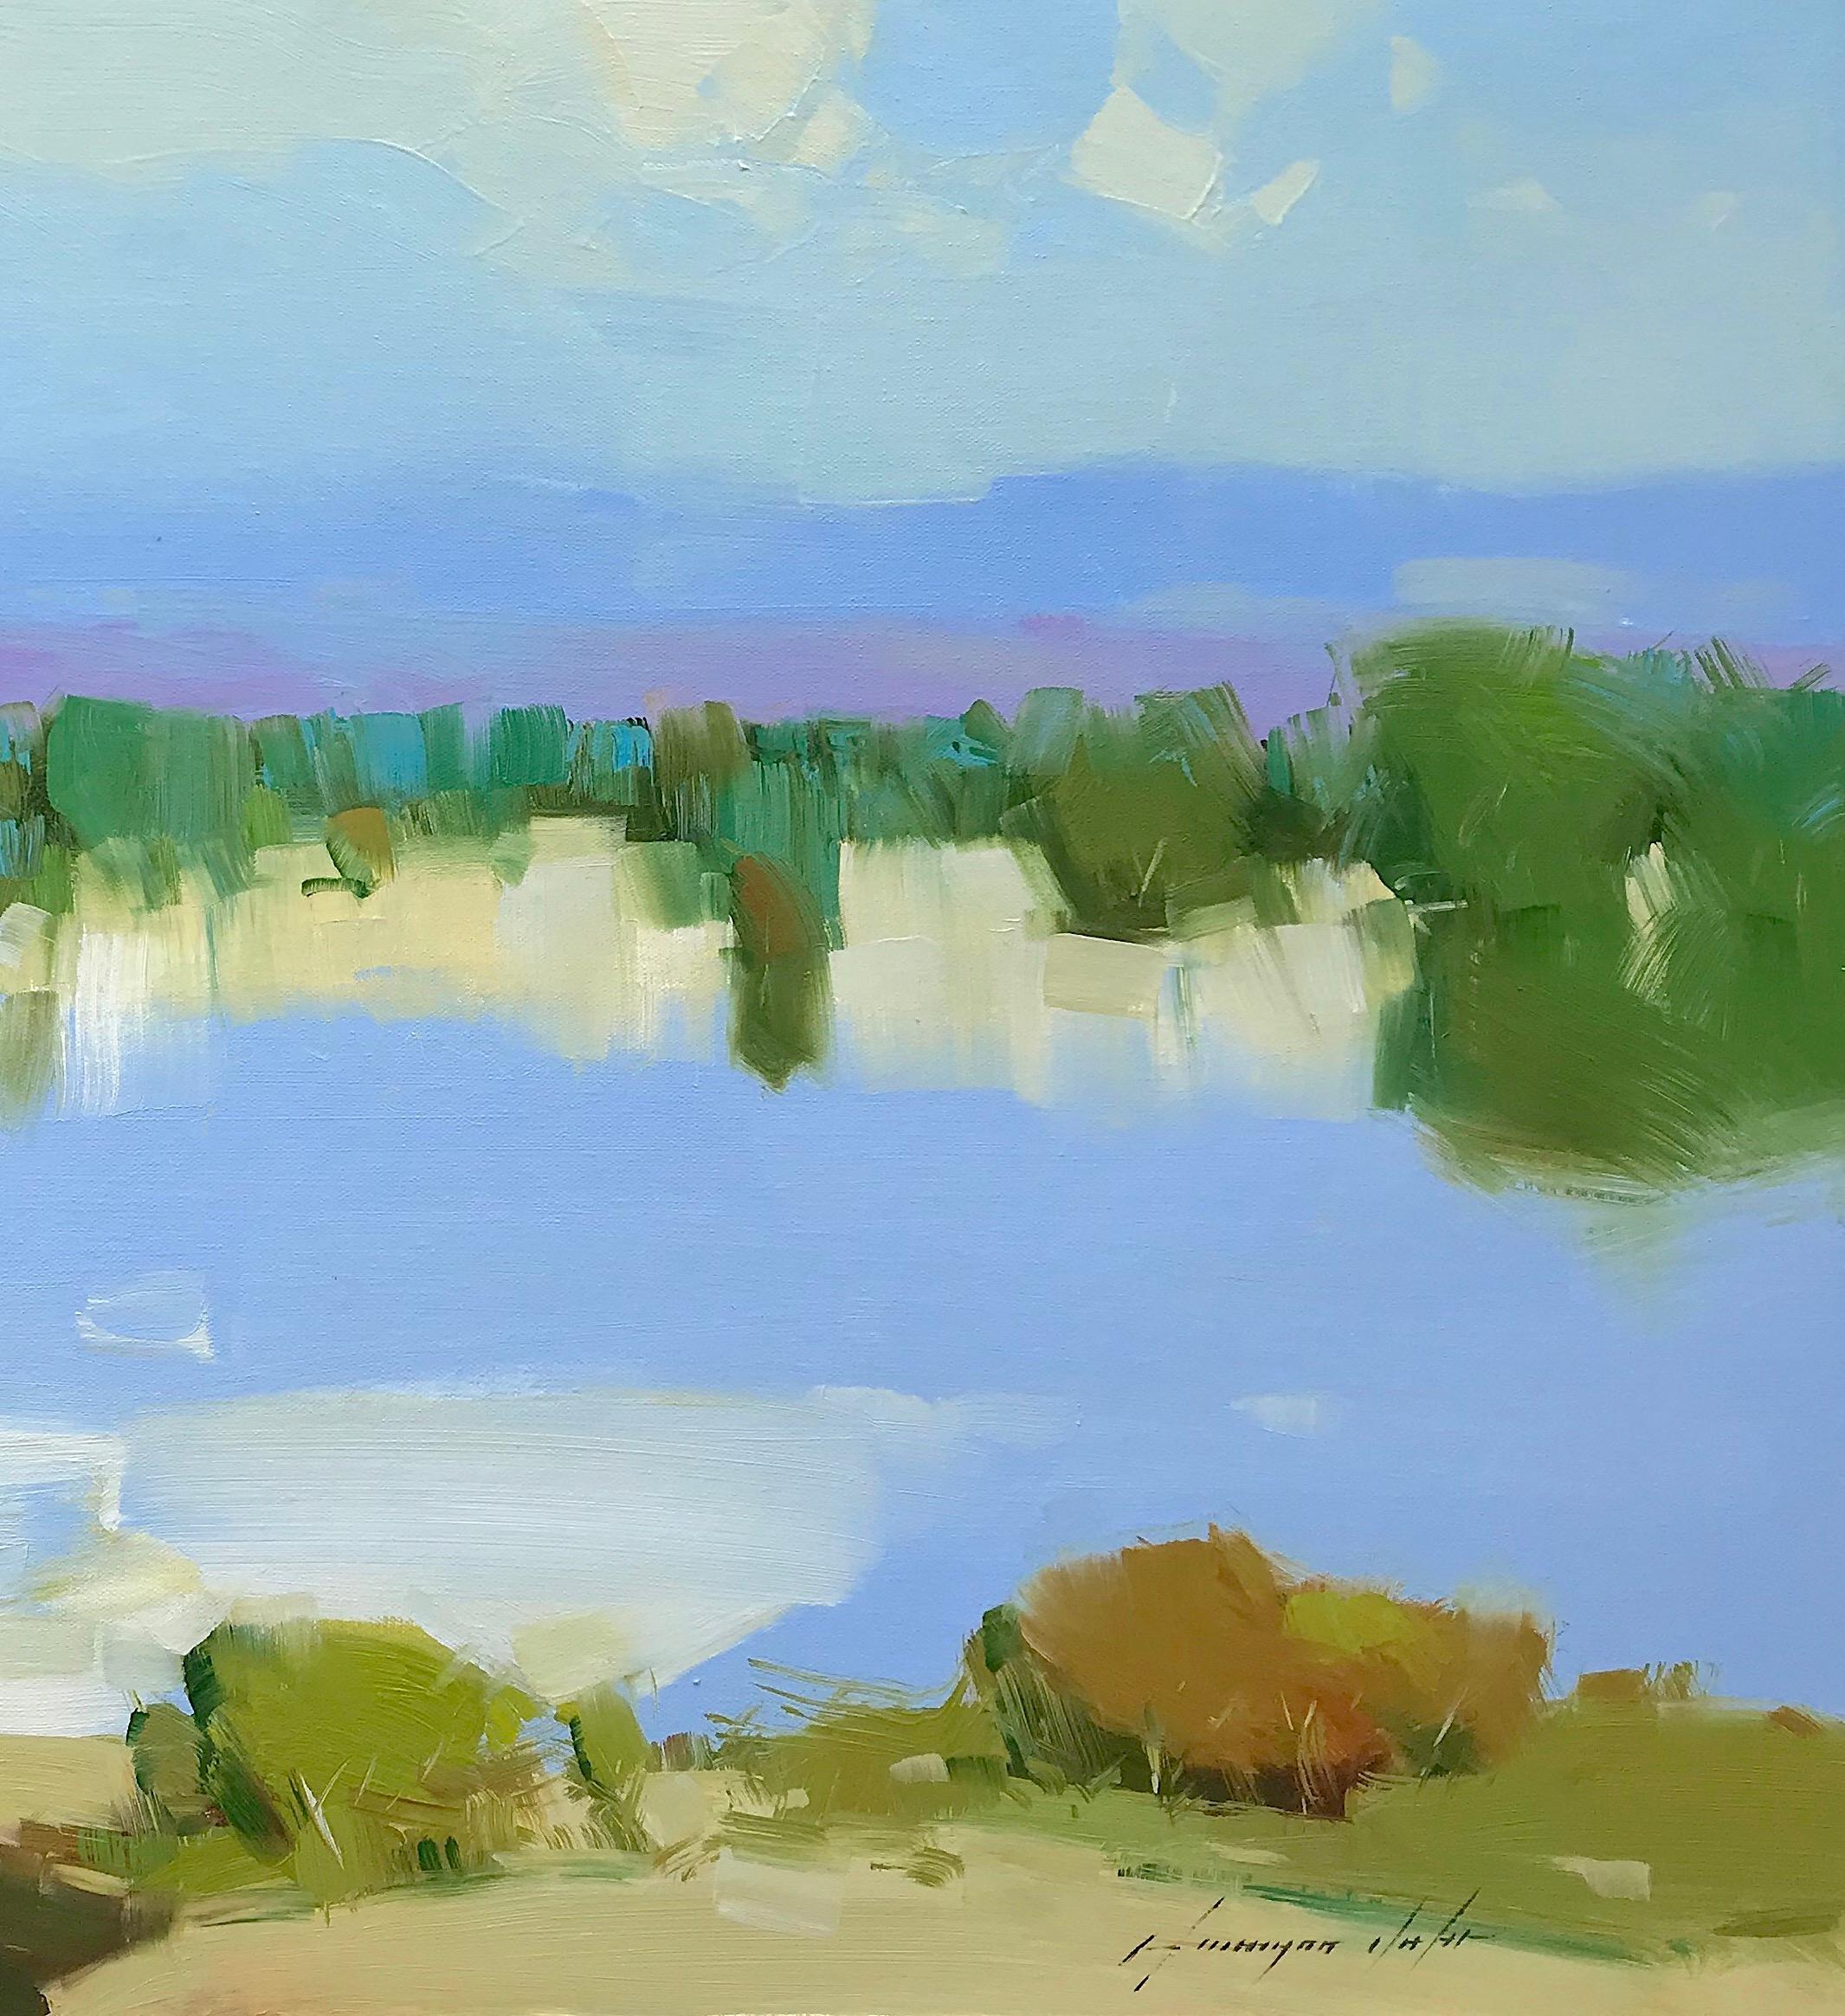 <p>Artist Comments<br />A soft autumn day along the river's edge. Vahe painted this impressionist scene at the edge of abstraction, depicting the fore-, middle- and background in blocks of complementary colors. Part of his long-running series of